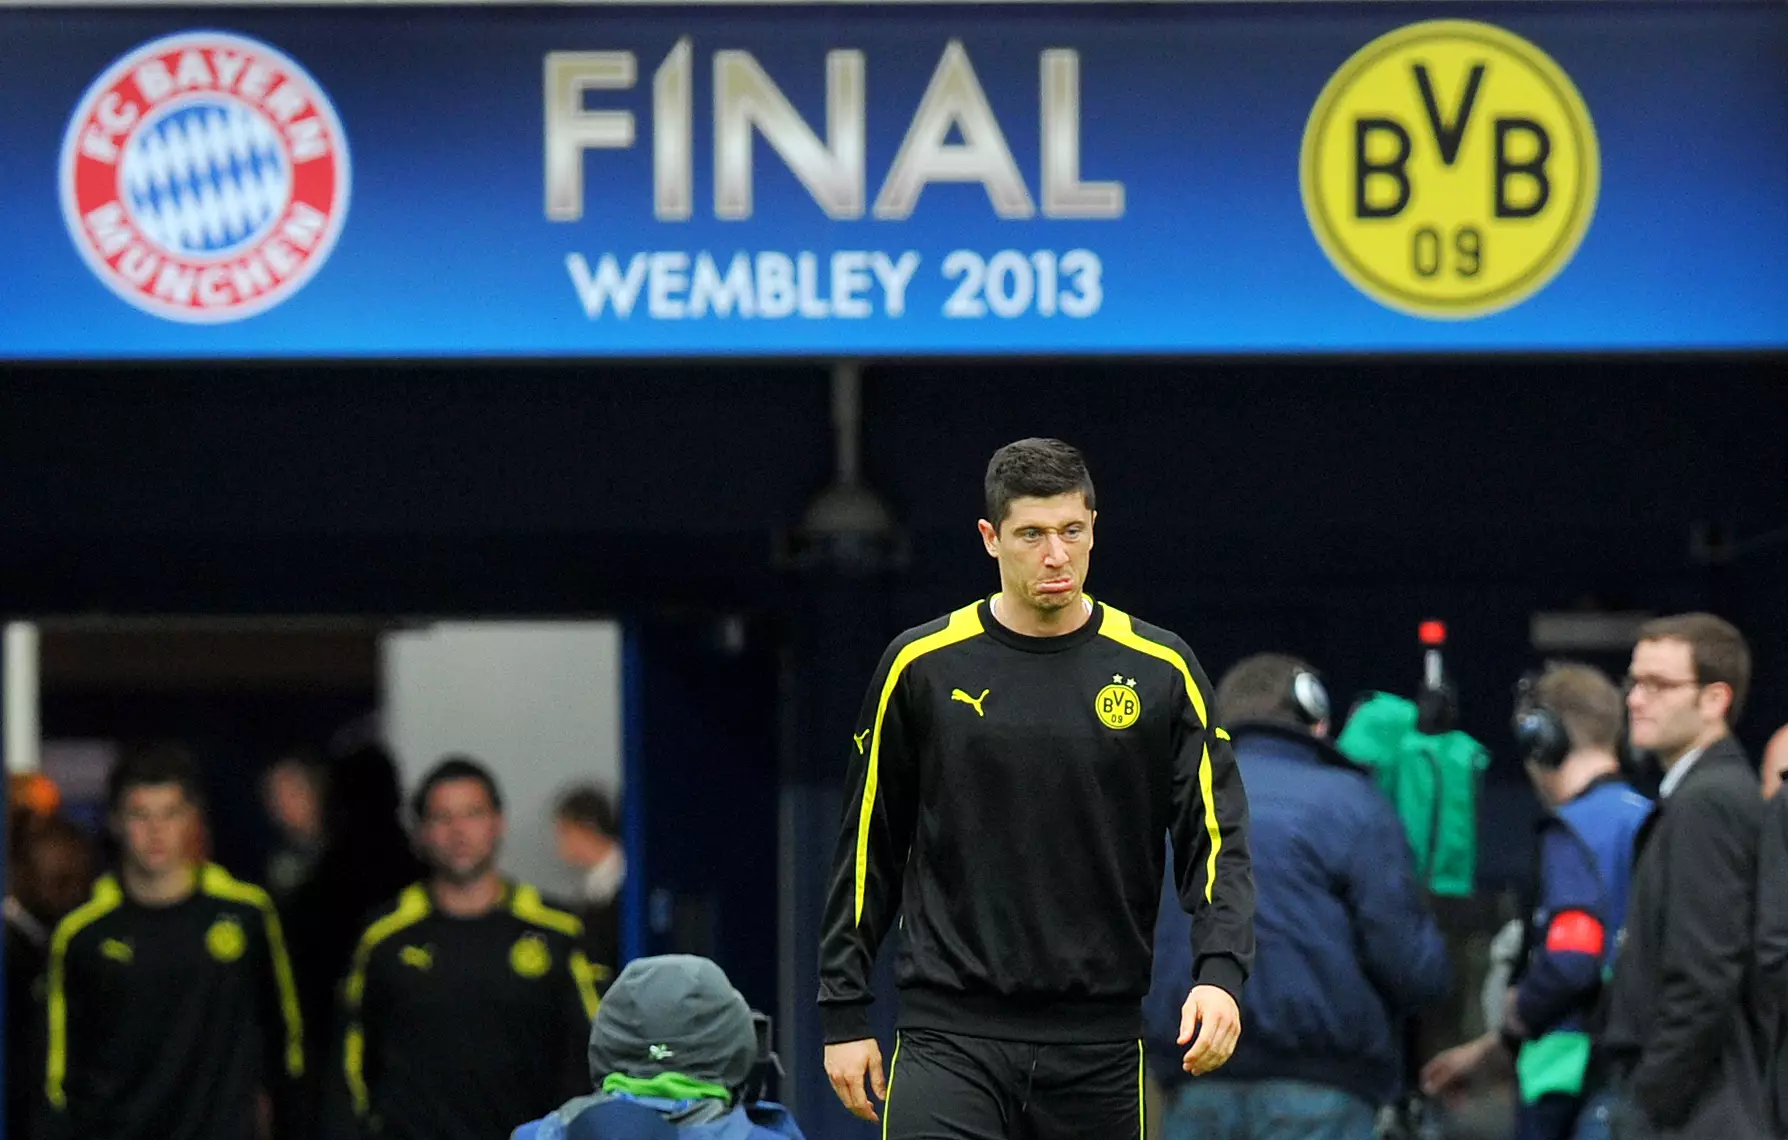 Lewandowski warms up for Dortmund ahead of their Champions League final vs Bayern in 2013. Image: PA Images